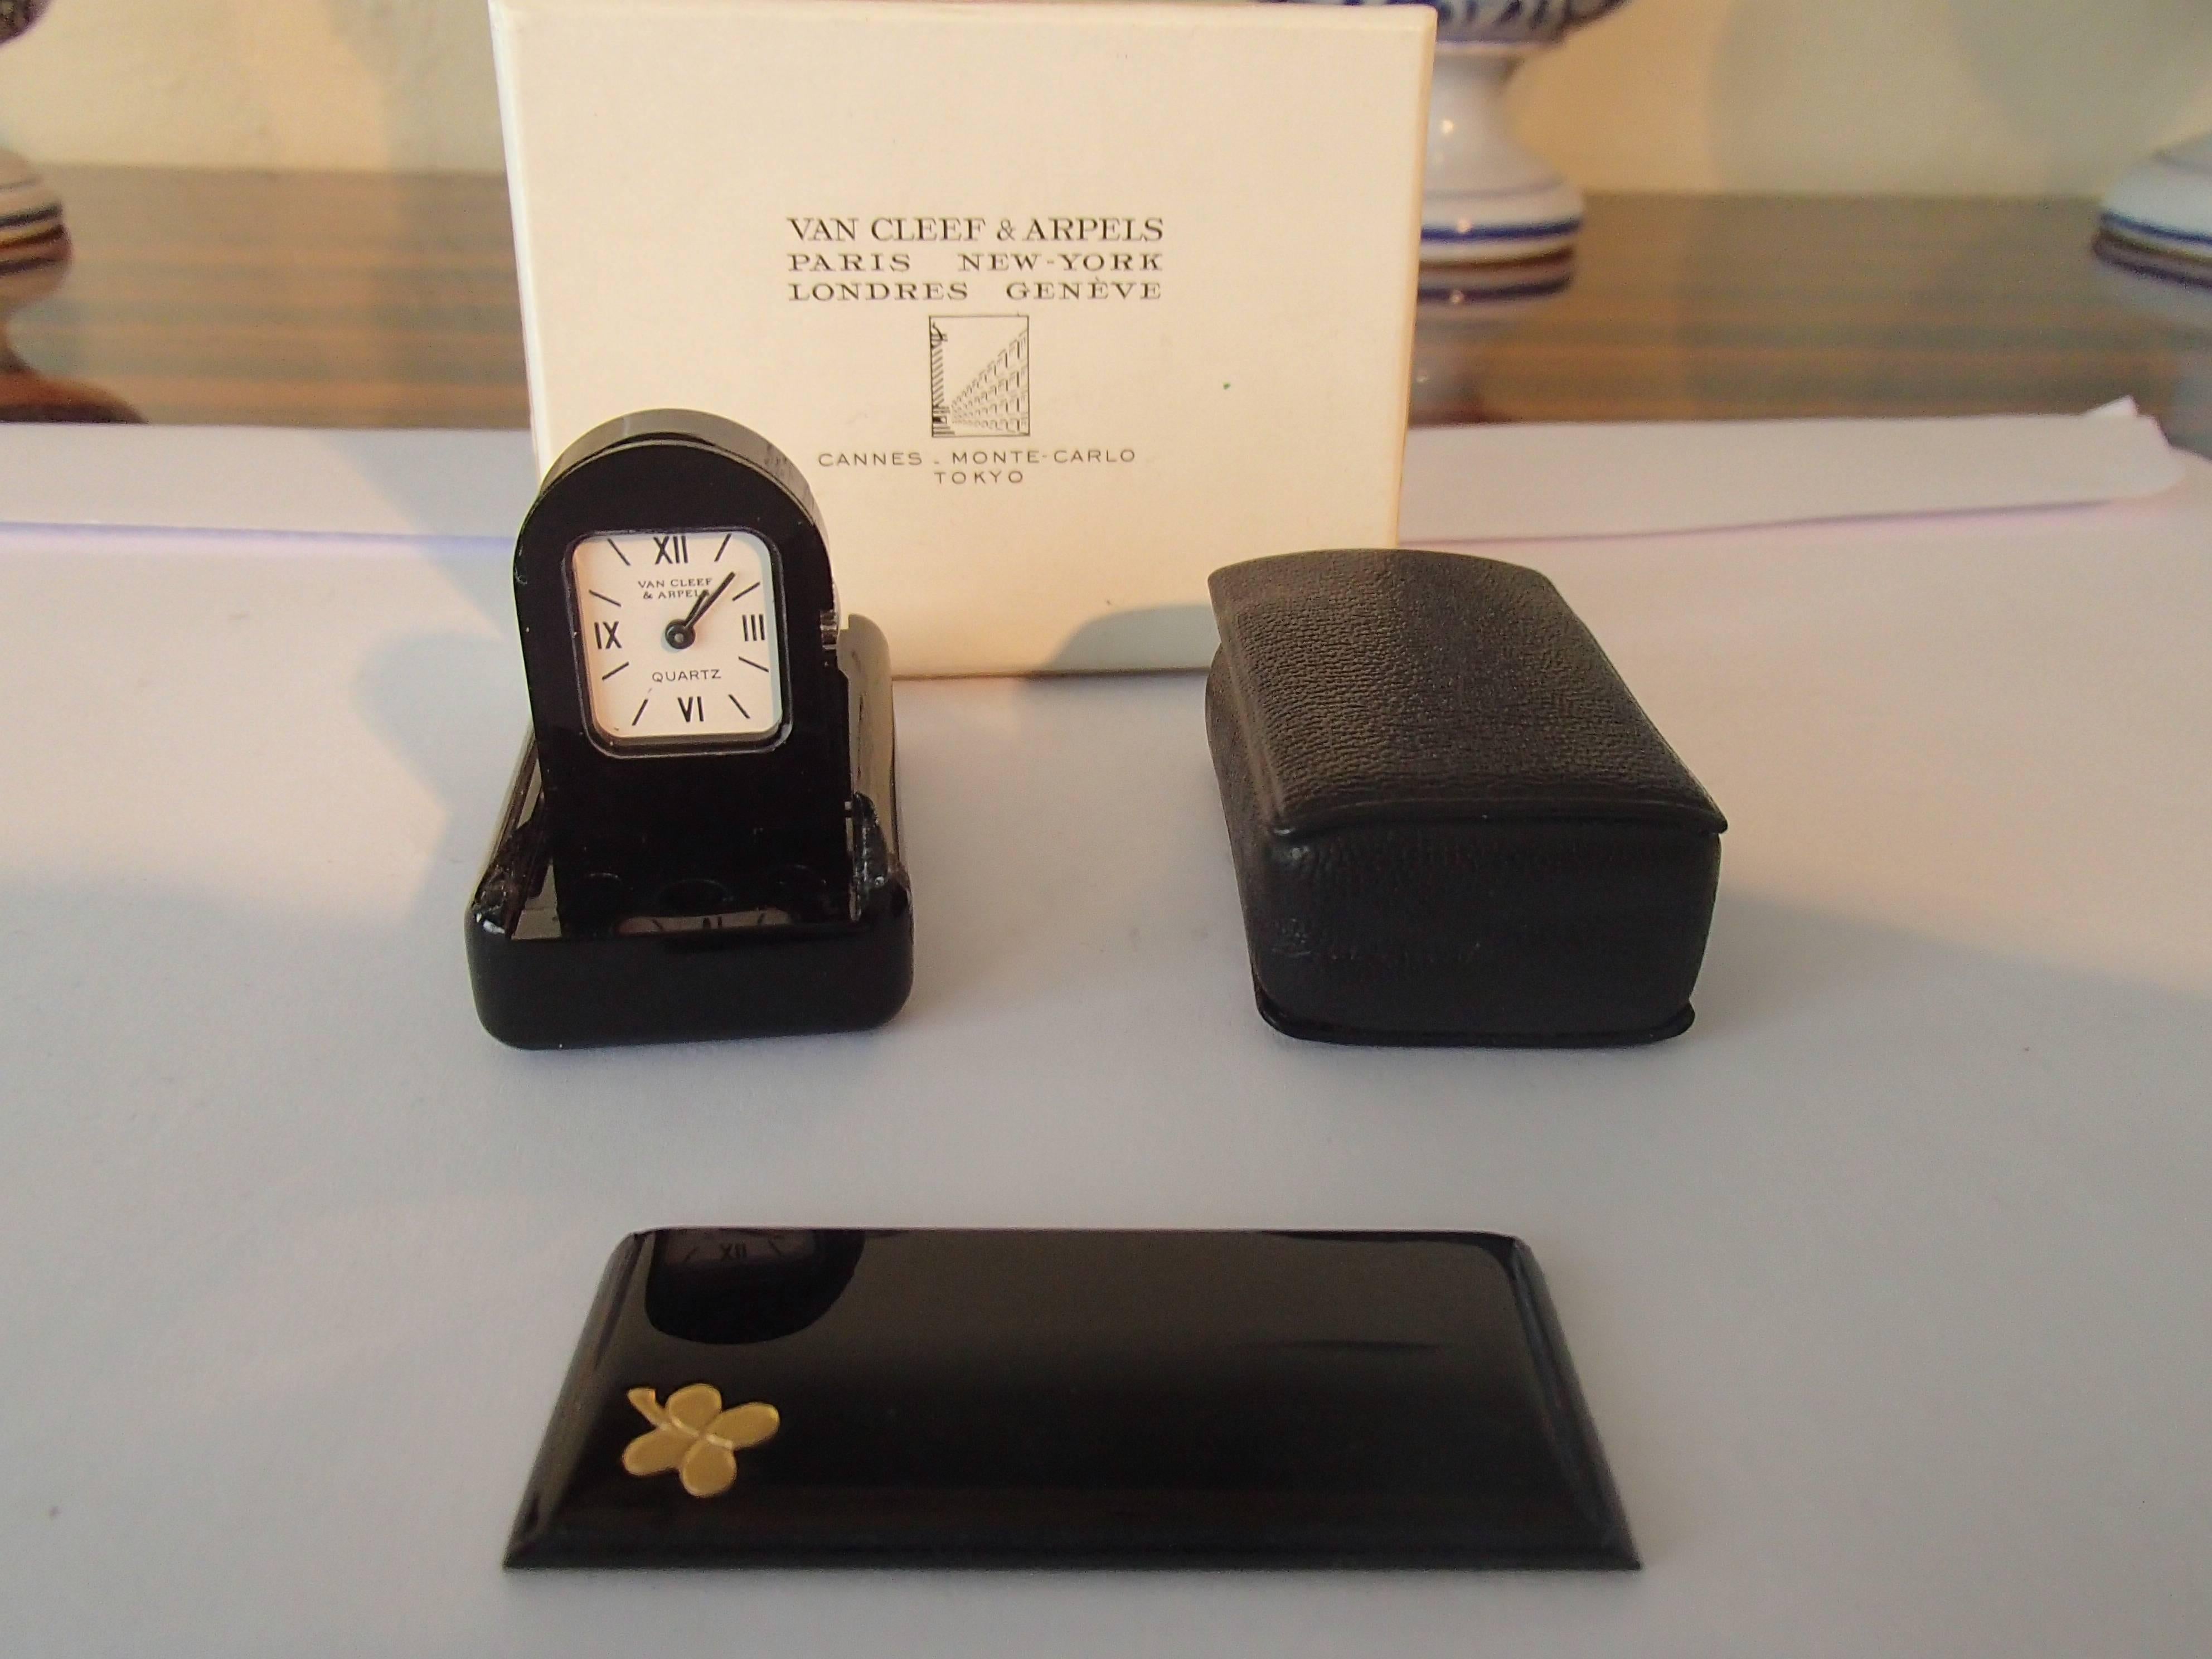 Late 20th Century Modern Travelling Clock by Van Cleef & Arpels Foldable in Case and Original Box